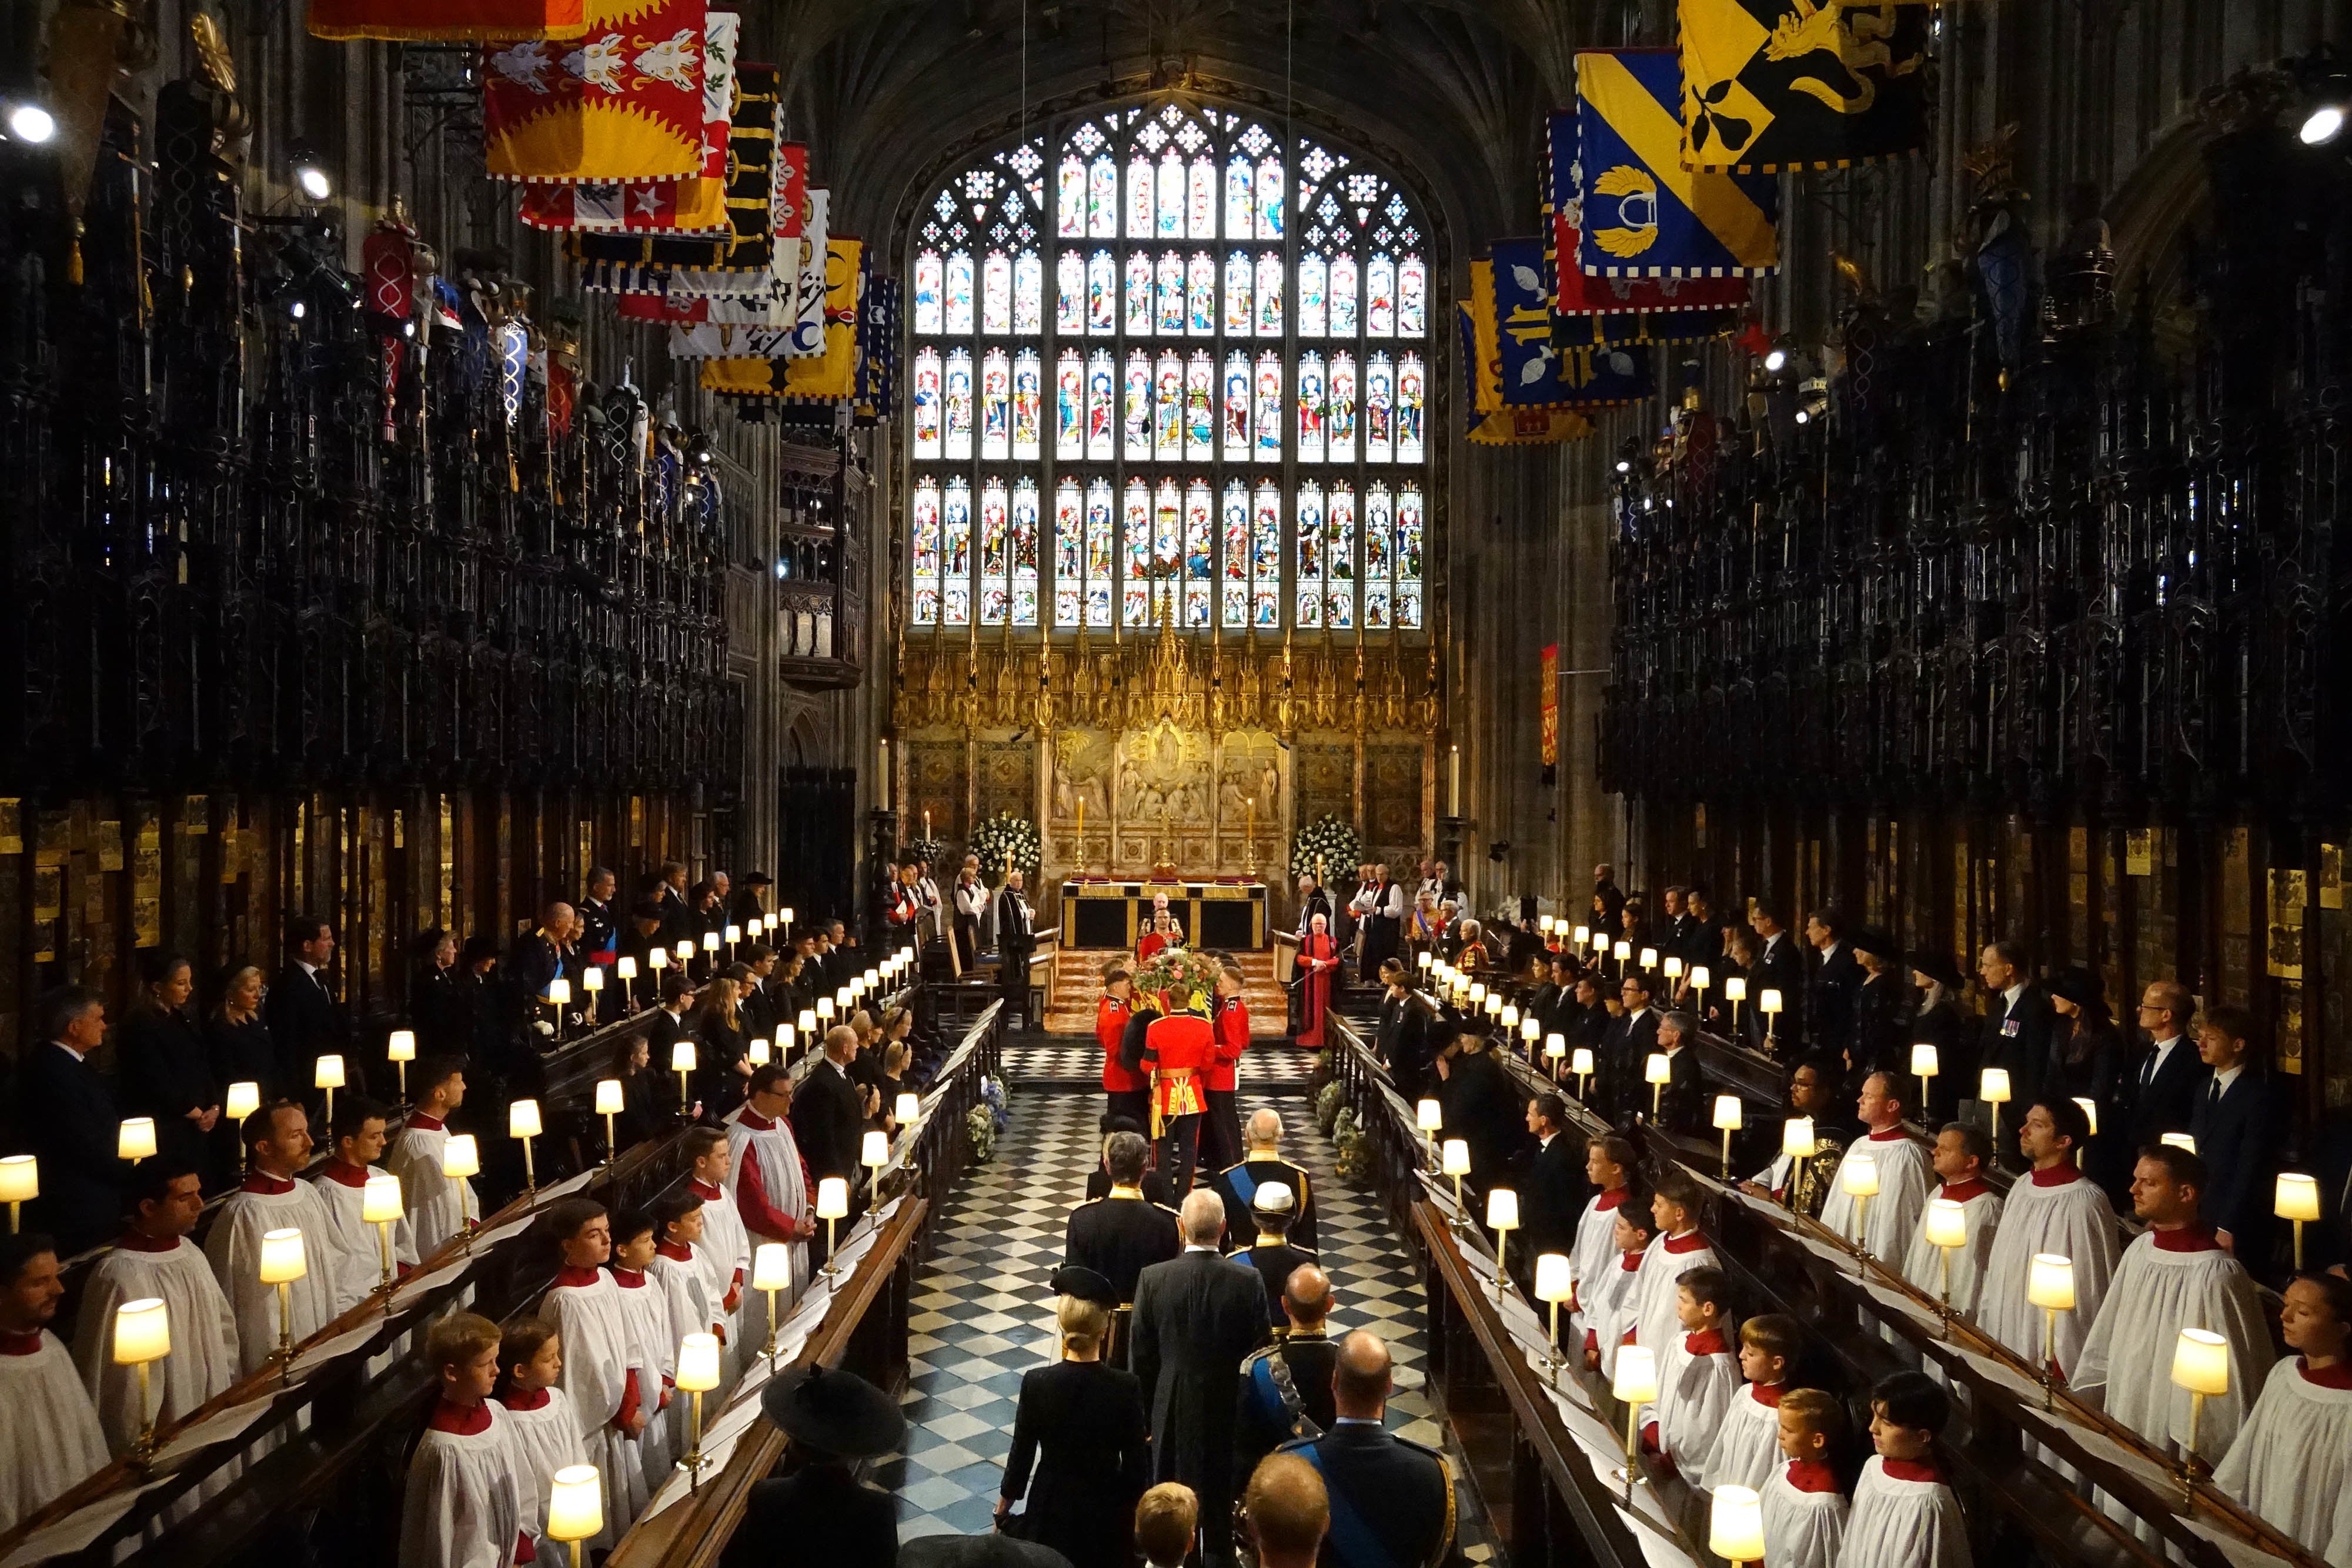 King Charles III and members of the royal family follow behind the coffin of Queen Elizabeth II as it is carried into St George’s Chapel in Windsor Castle.